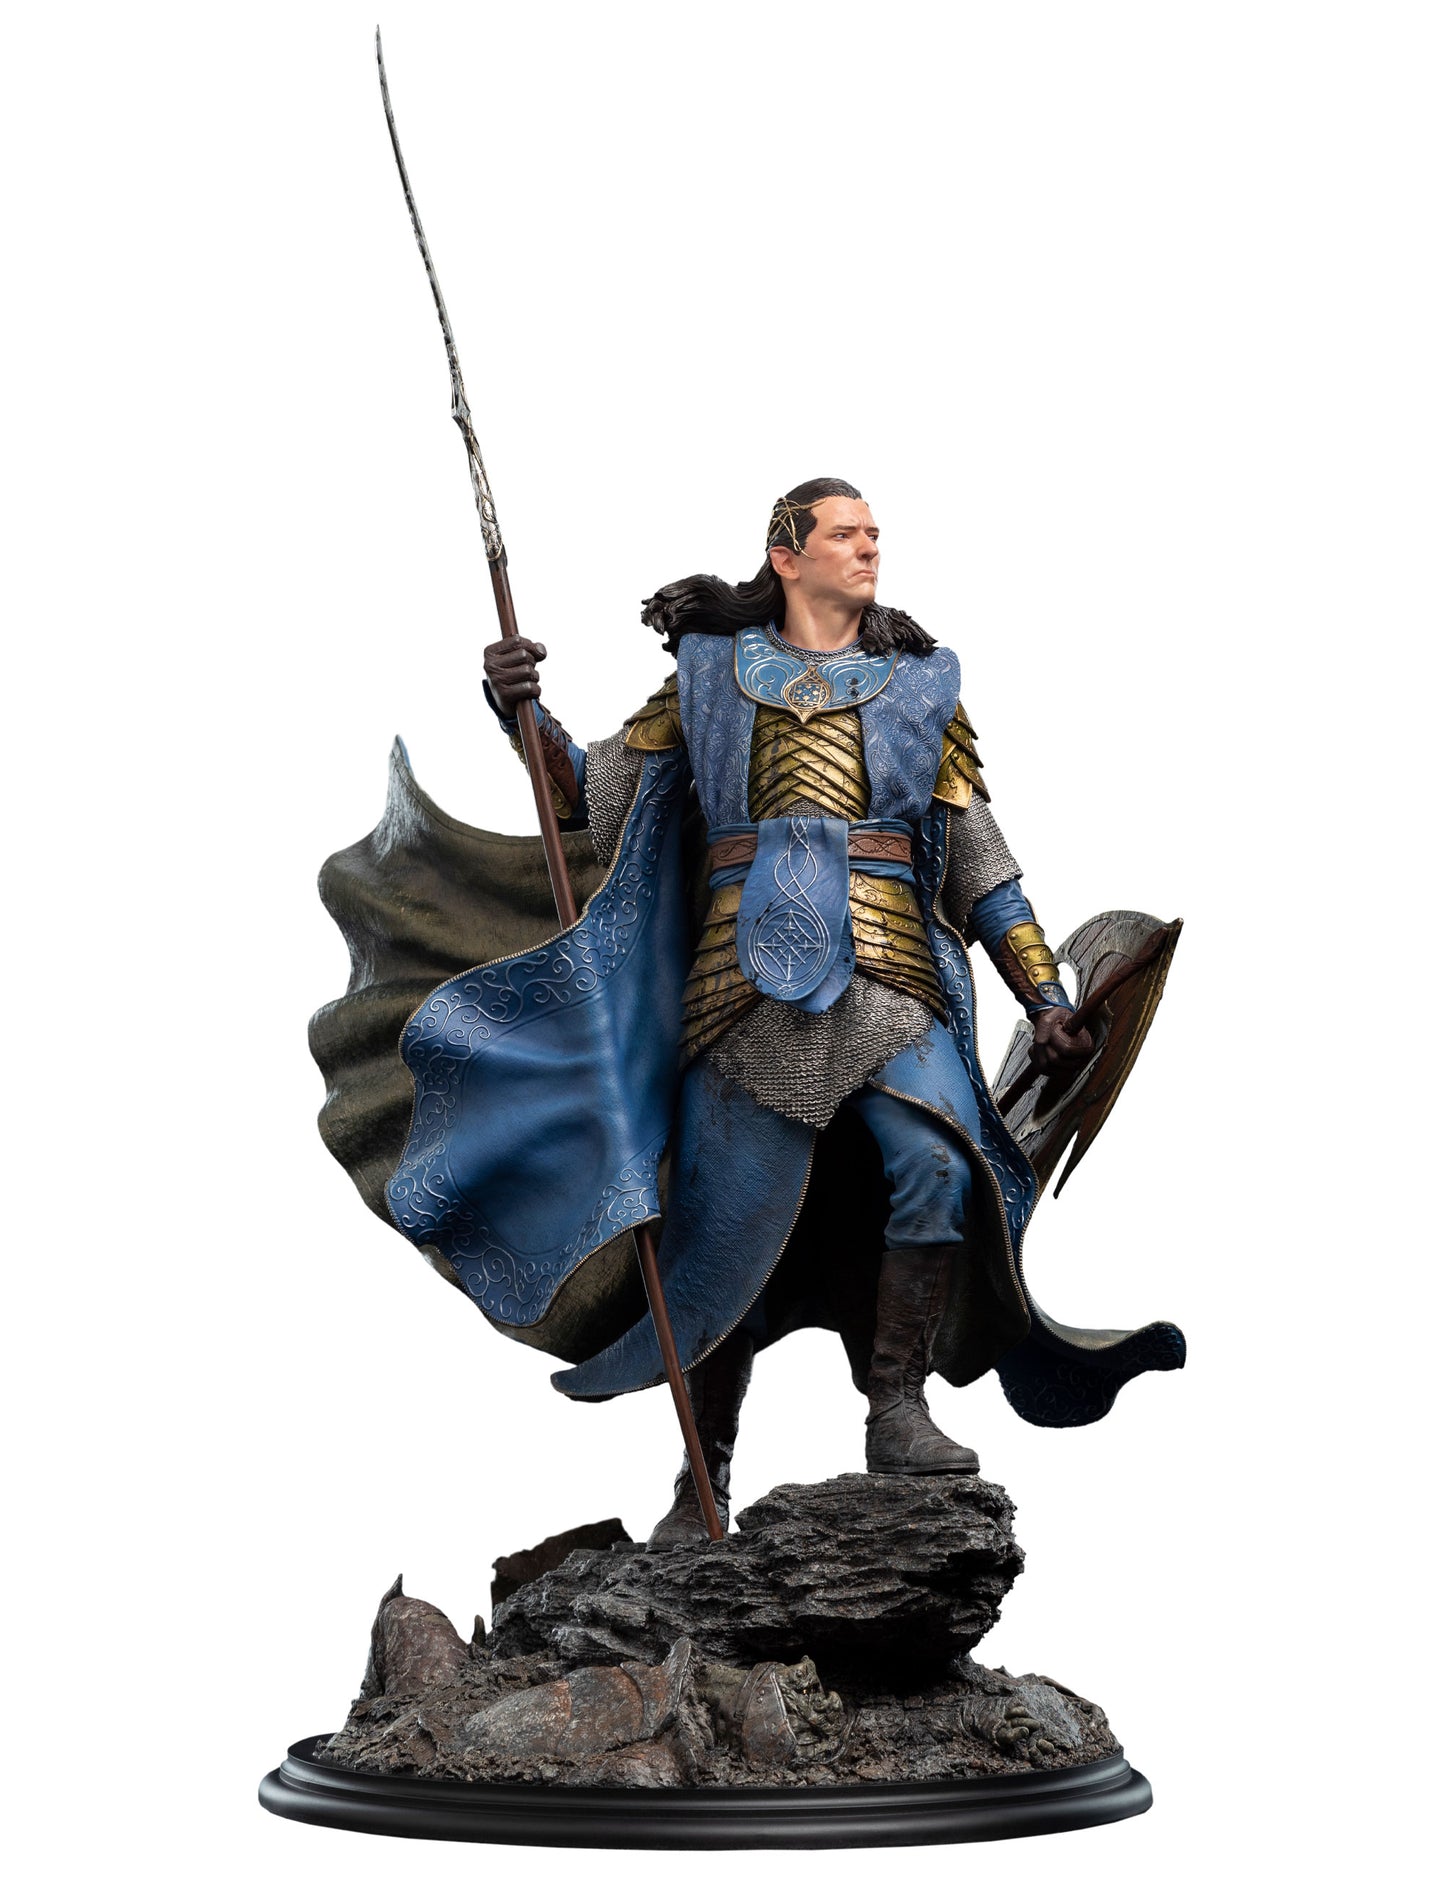 Load image into Gallery viewer,  Gil-galad (Lord of the Rings) 1:6 Scale 20th Anniversary Limited Edition Statue by Weta Workshop
